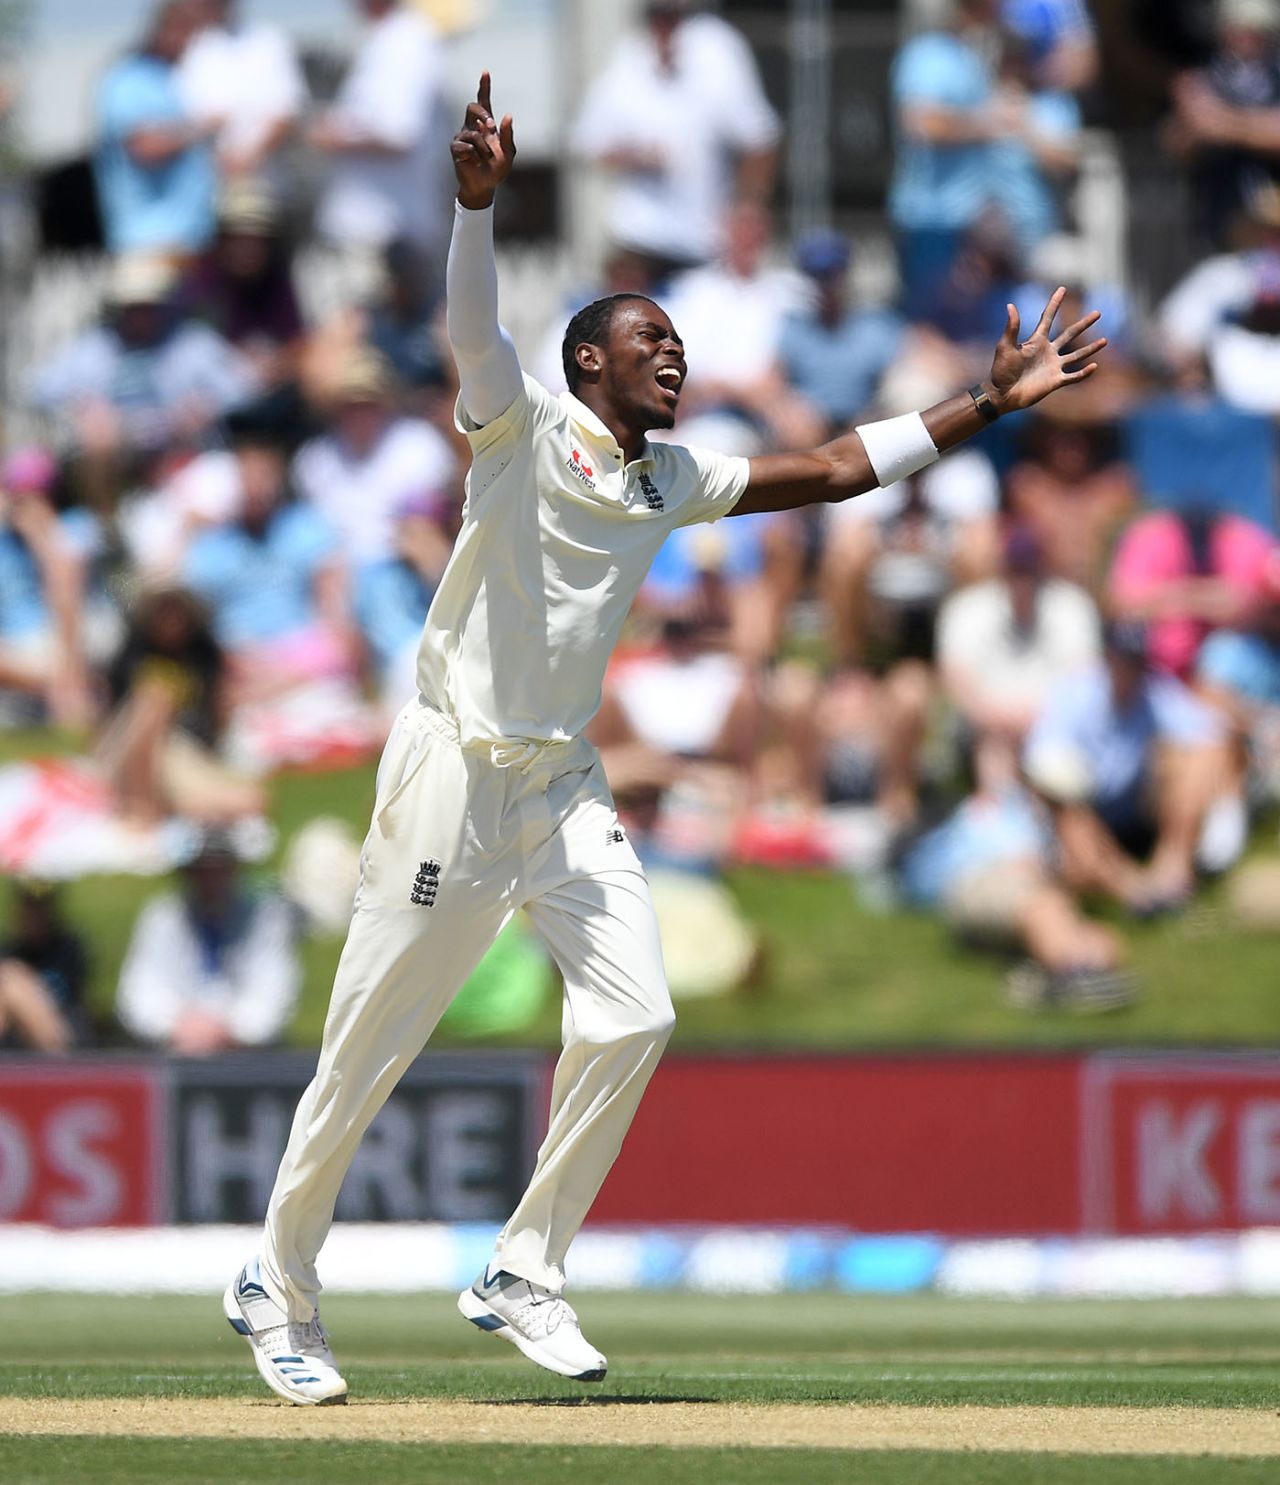 Jofra Archer yelps in anguish, New Zealand v England, 1st Test, Mount Maunganui, 3rd day, November 23, 2019